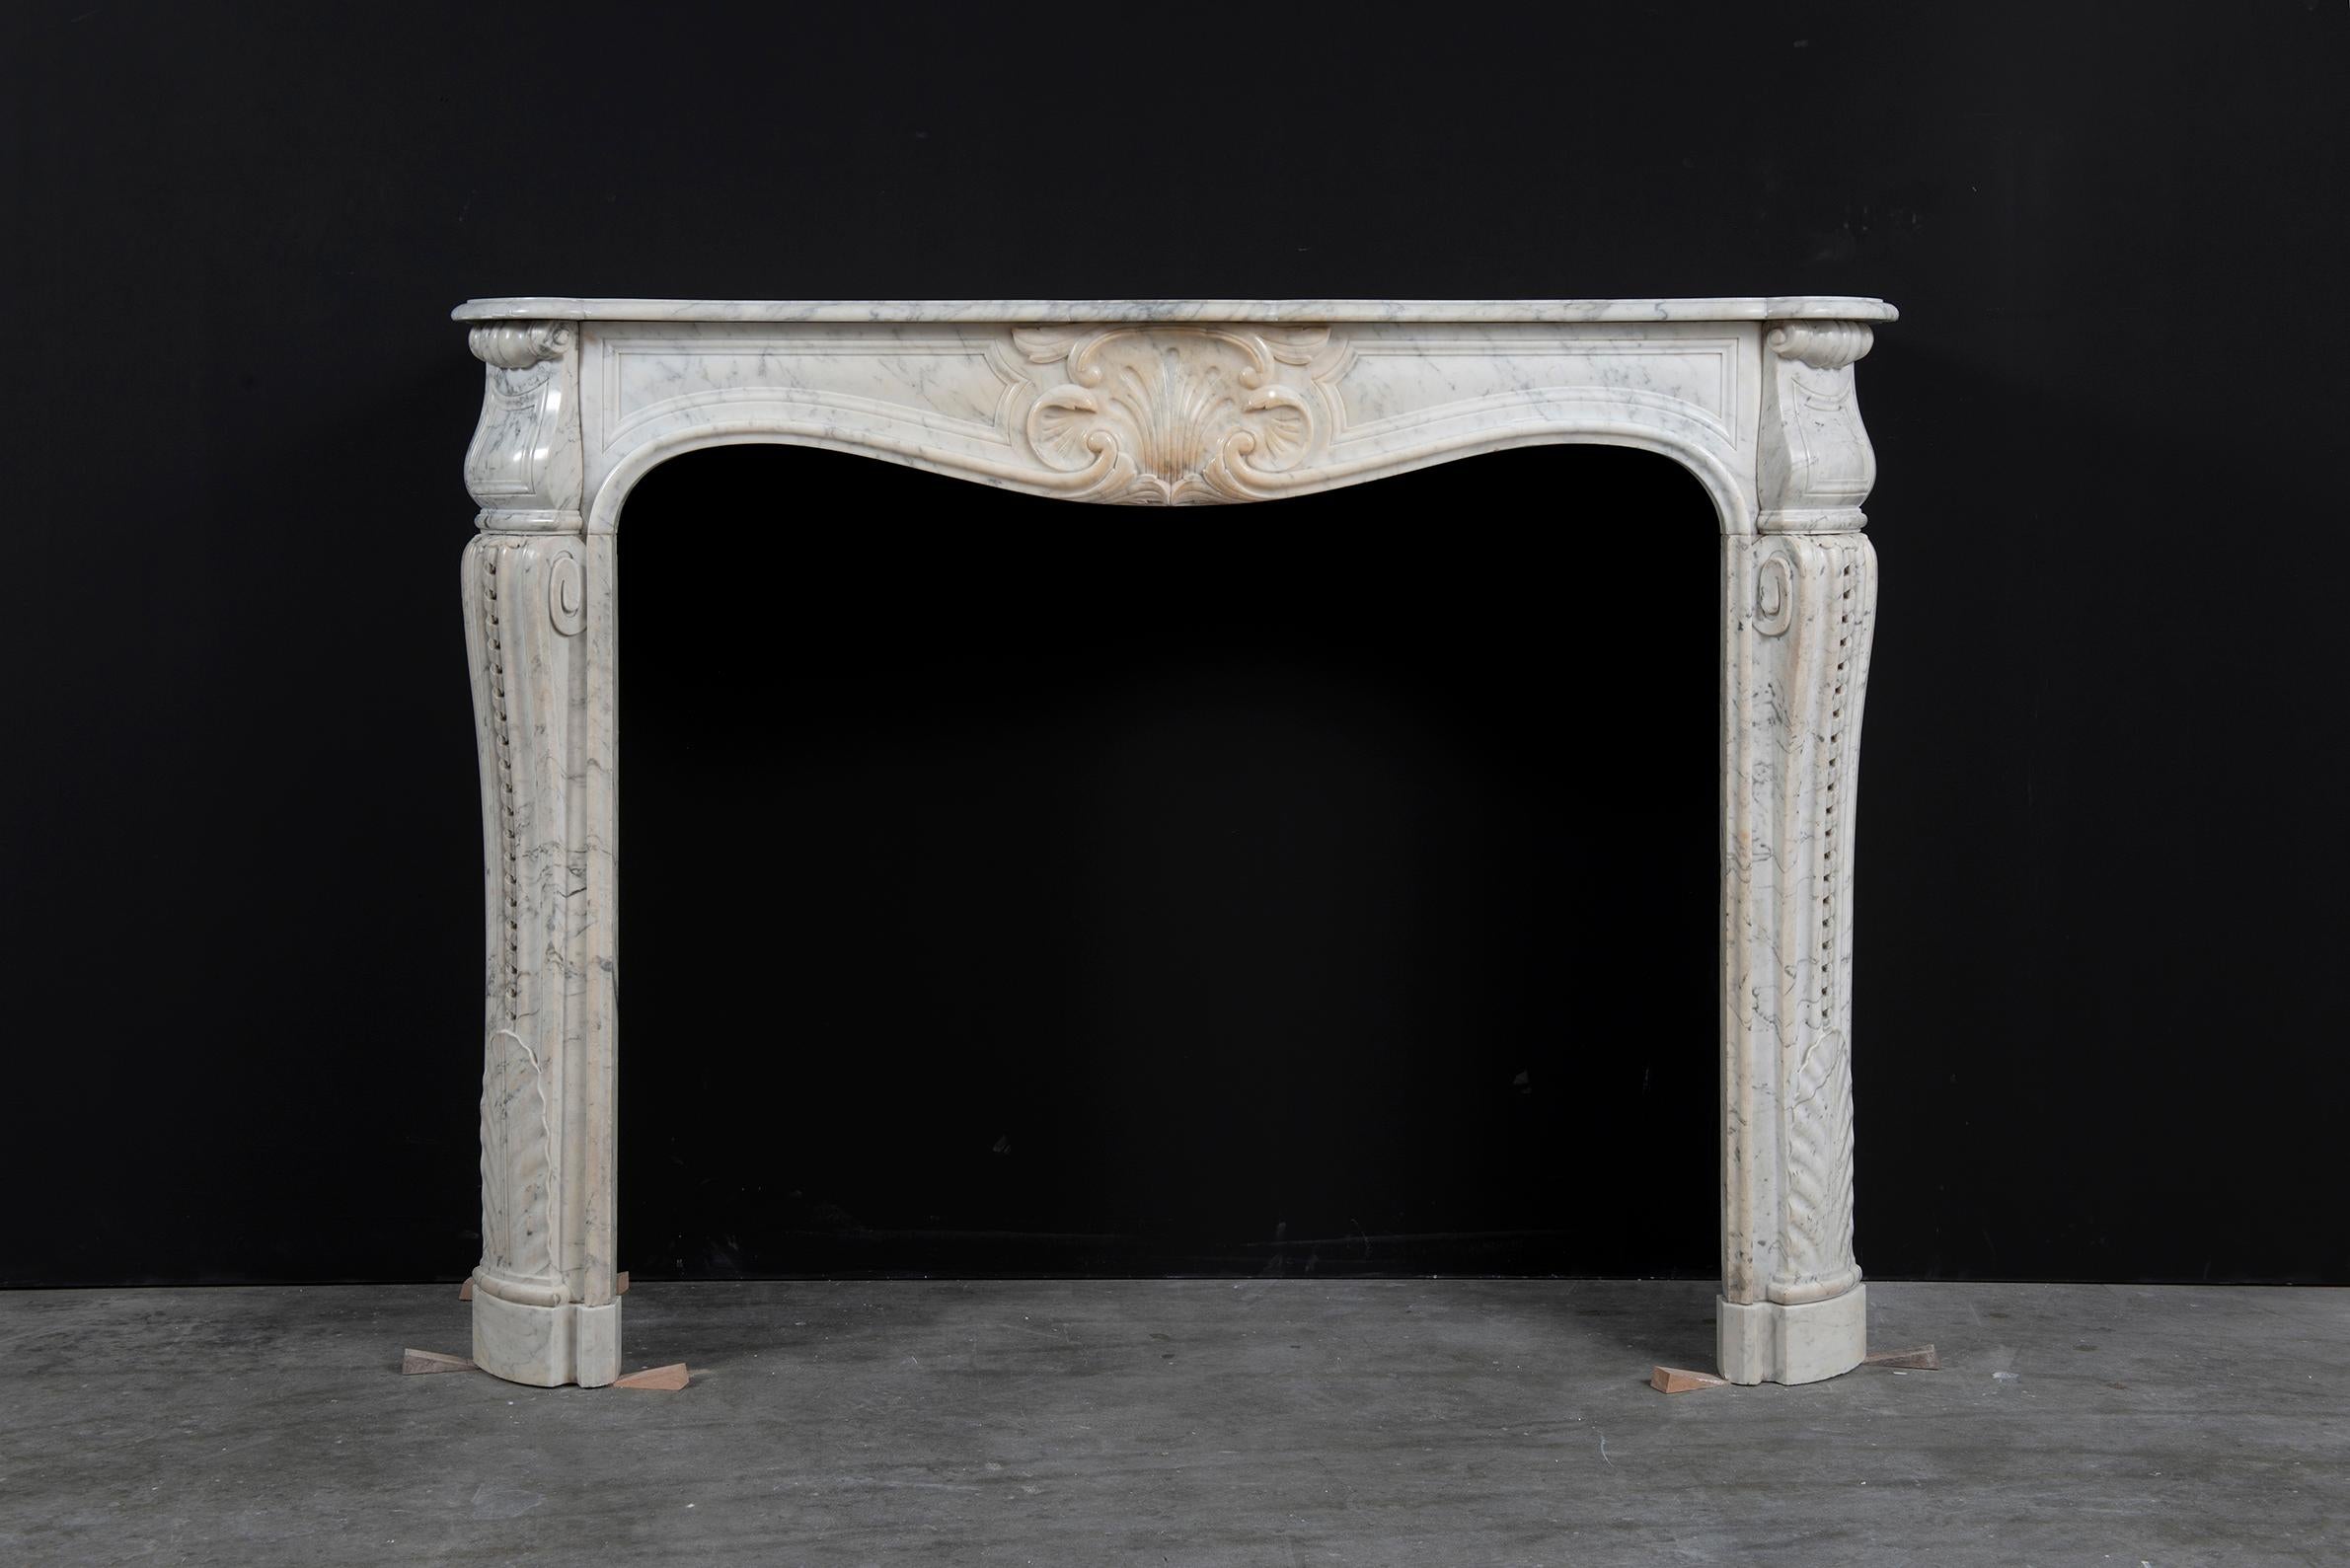 Antique Louis XV fireplace mantel in Carrara white marble
Beautiful antique Louis XV fireplace mantel.

Very fine carved 19th century Louis XV mantelpiece from Paris.
Beautiful decorative piece, nice proportioned with serpentine breakfront shelf